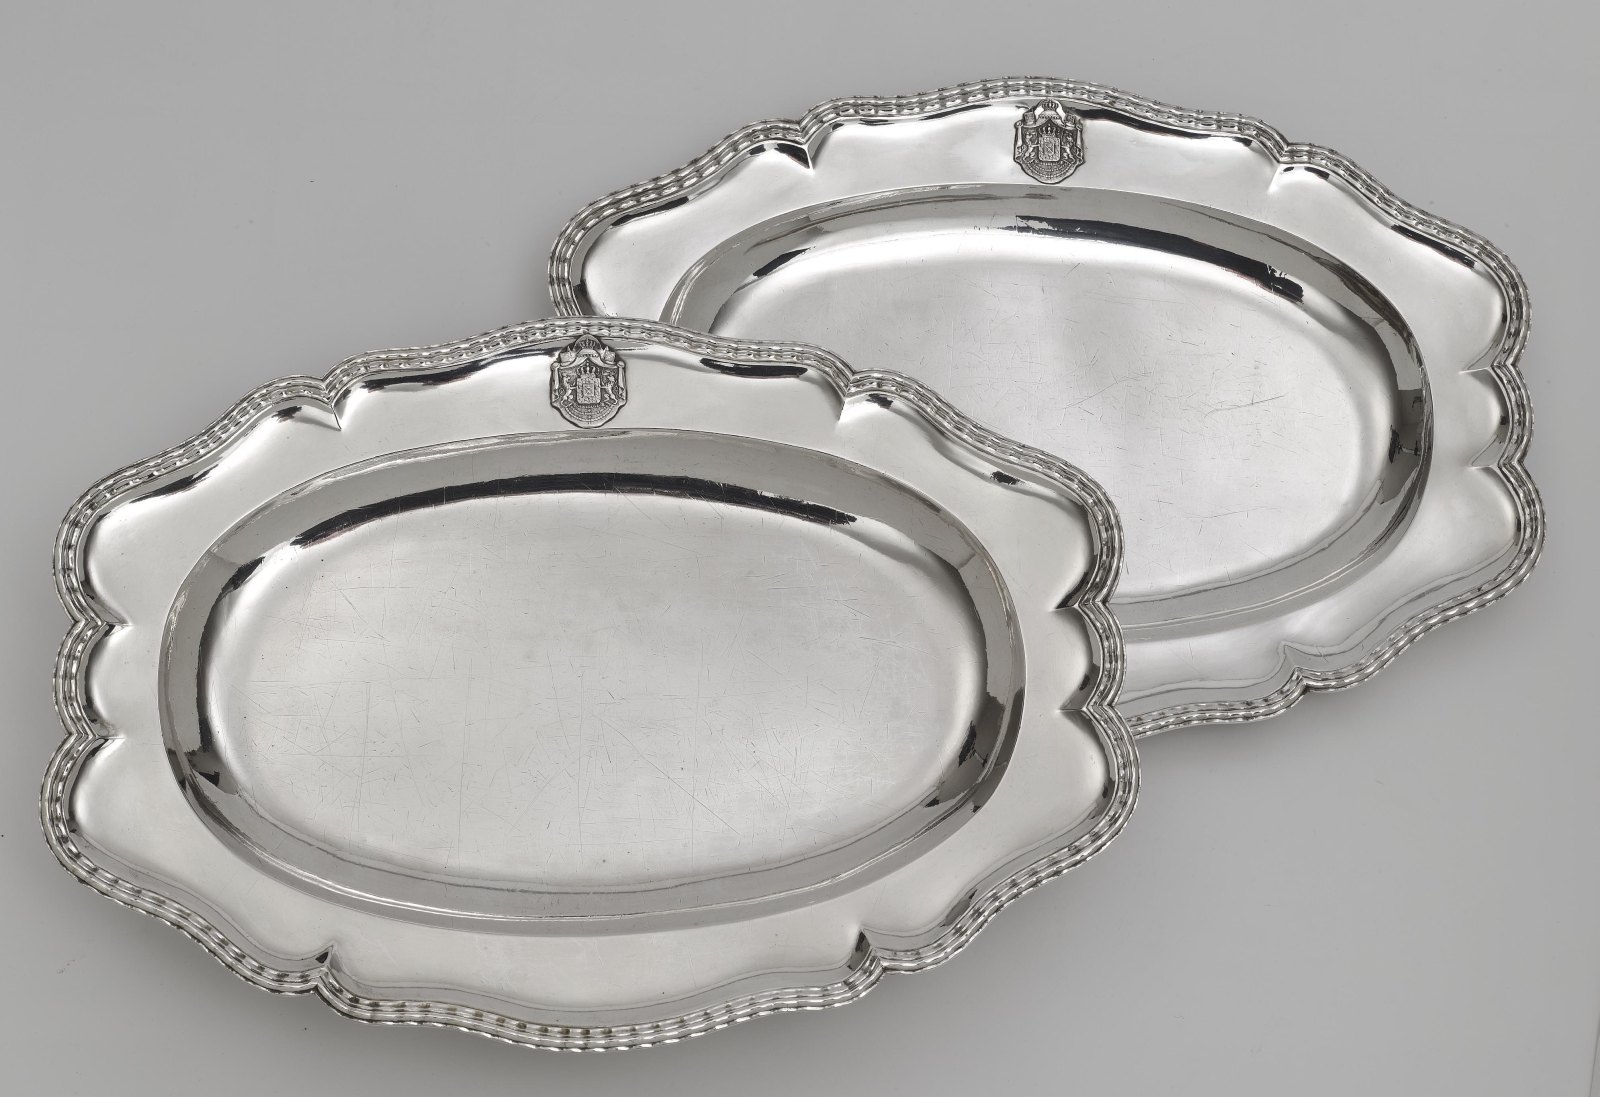 Two oval platters from the so-called "Bamberg Service" ATTENTION Lot 3-6 will be sold after lot 67